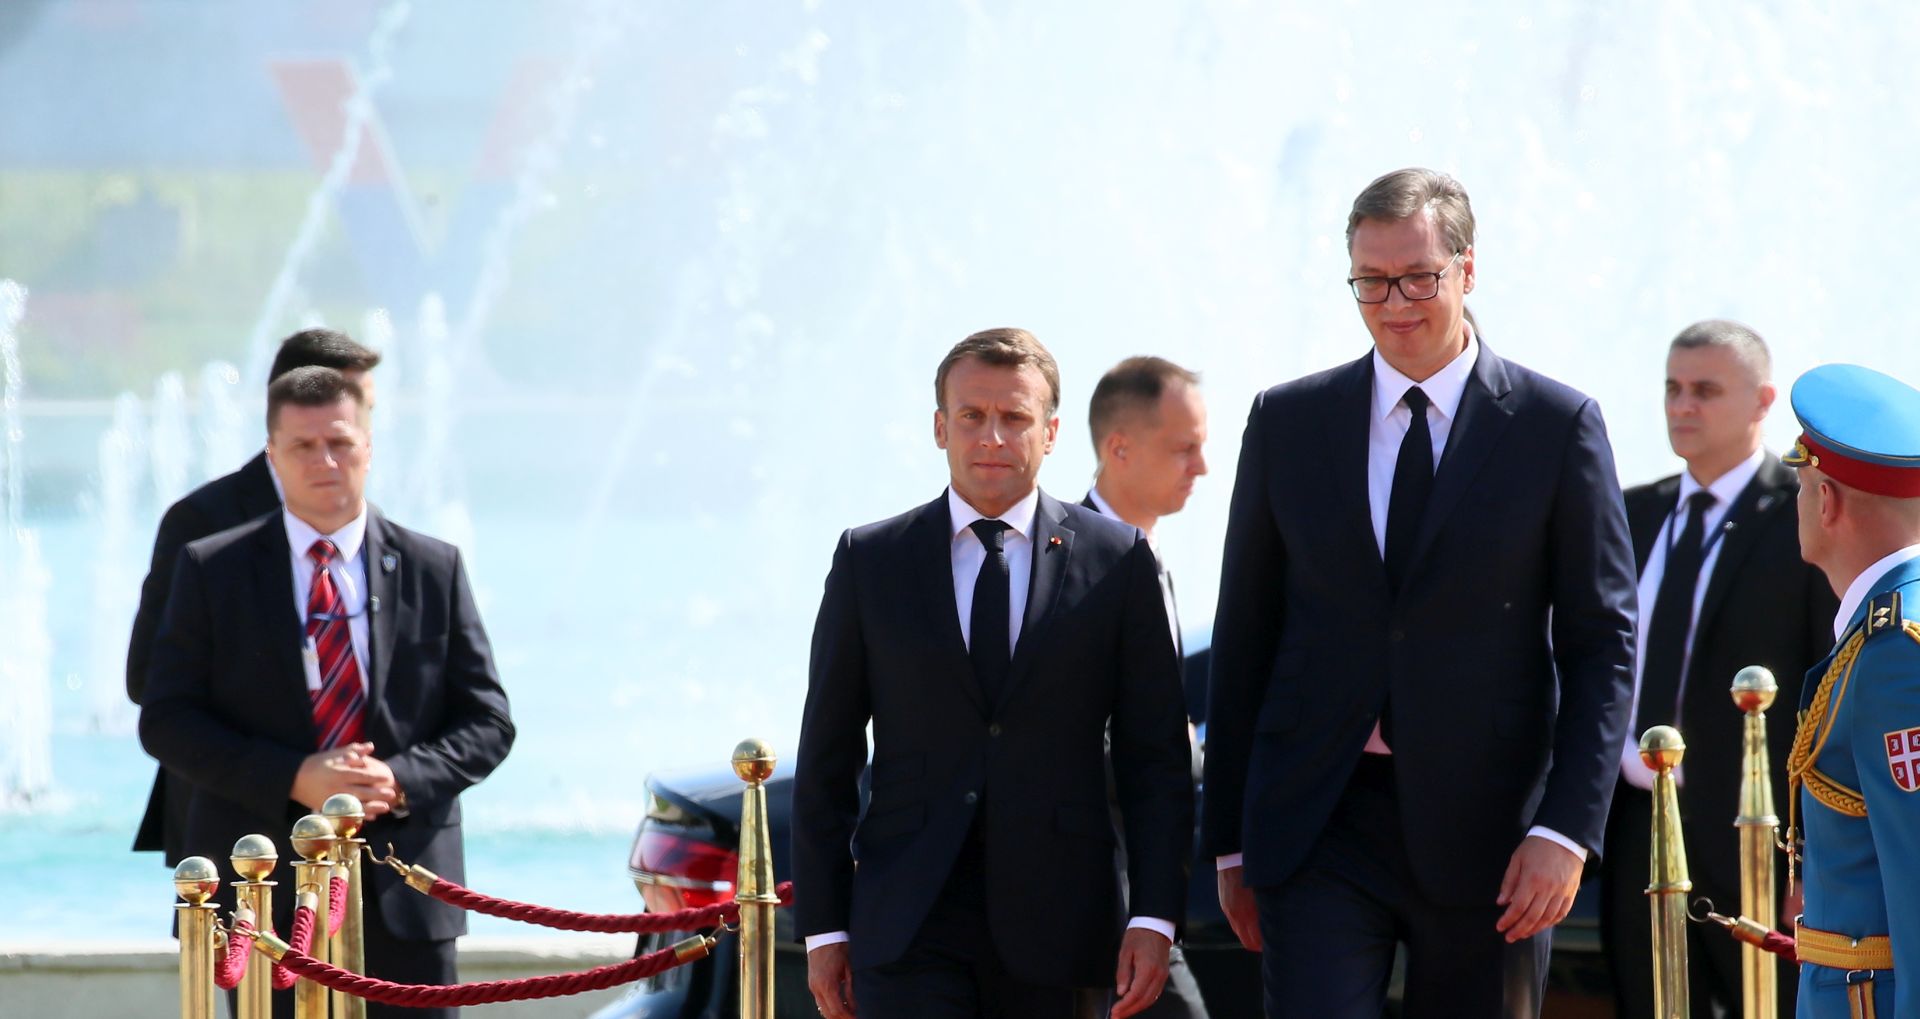 epa07718880 French President Emmanuel Macron (L) and Serbian president Aleksandar Vucic (R) attend a welcome ceremony during his visit in Belgrade, Serbia, 15 July 2019. President Macron is on a two-day state visit to Serbia.  EPA/KOCA SULEJMANOVIC